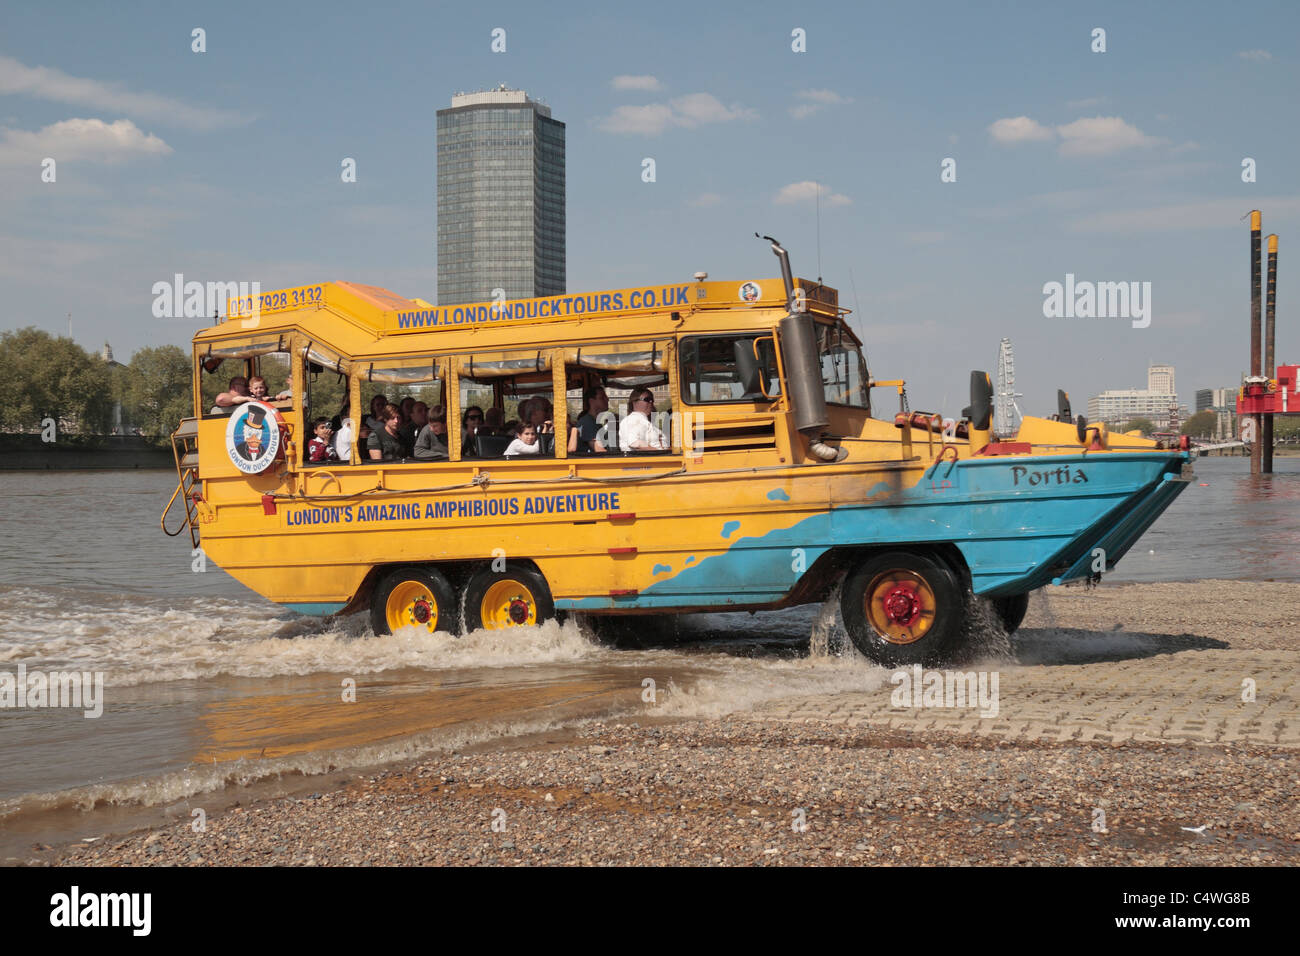 A WWII DUK-W amphibious vehicle (or Duck) converted into a ...